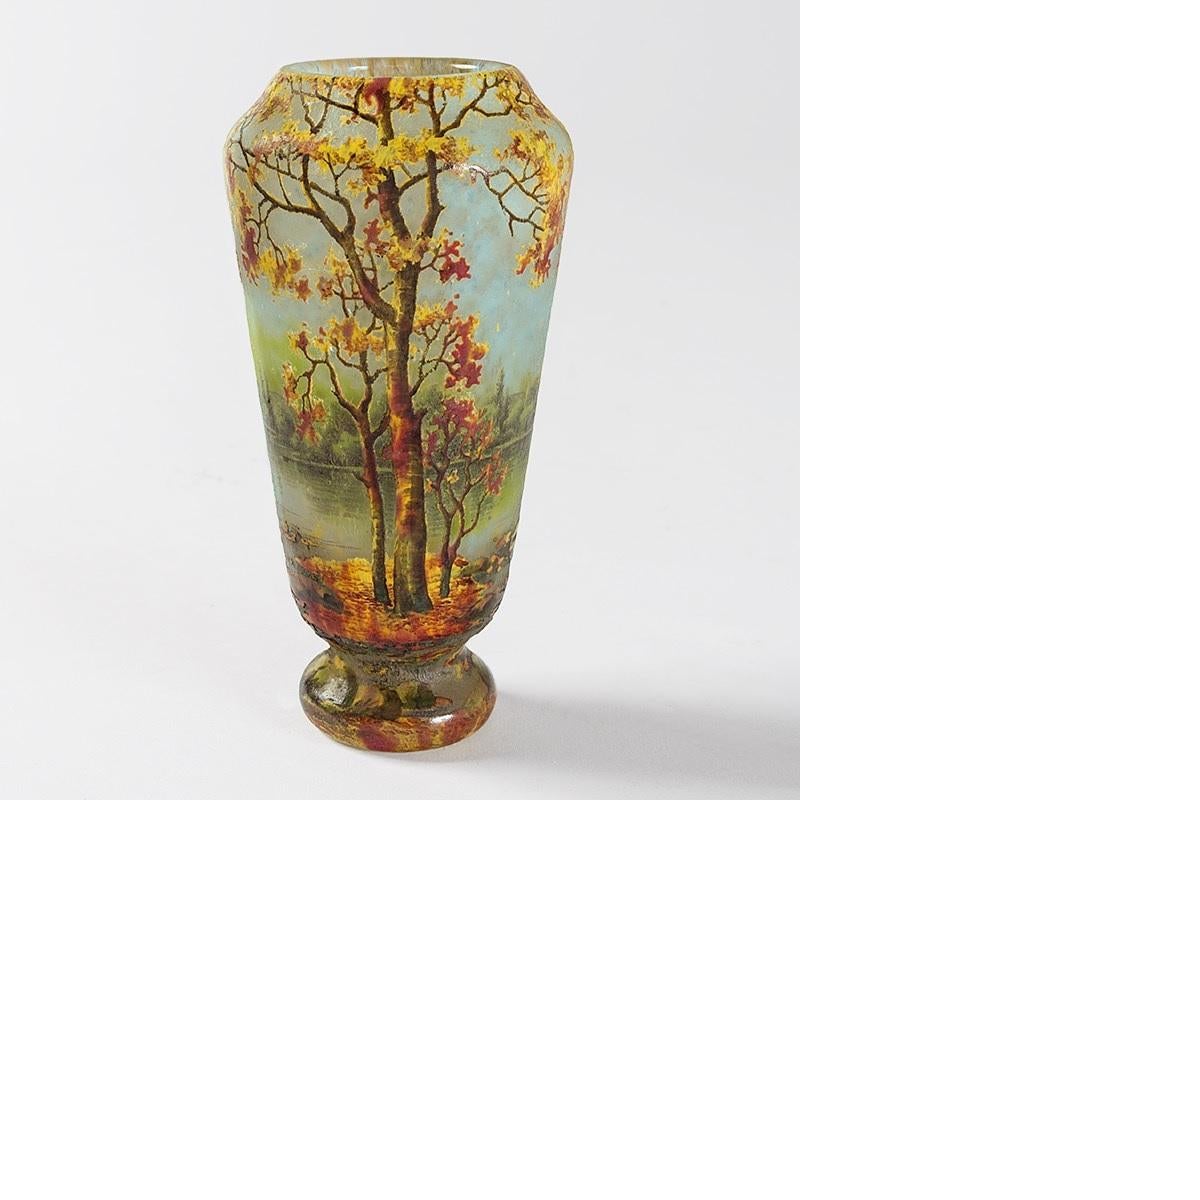 A French Art Nouveau vase by Daum featuring a forest scene in vitrified glass. The intricate scene on this vase has components that together form an autumnal landscape. The ground is largely made up of a central band of orange that flows into the